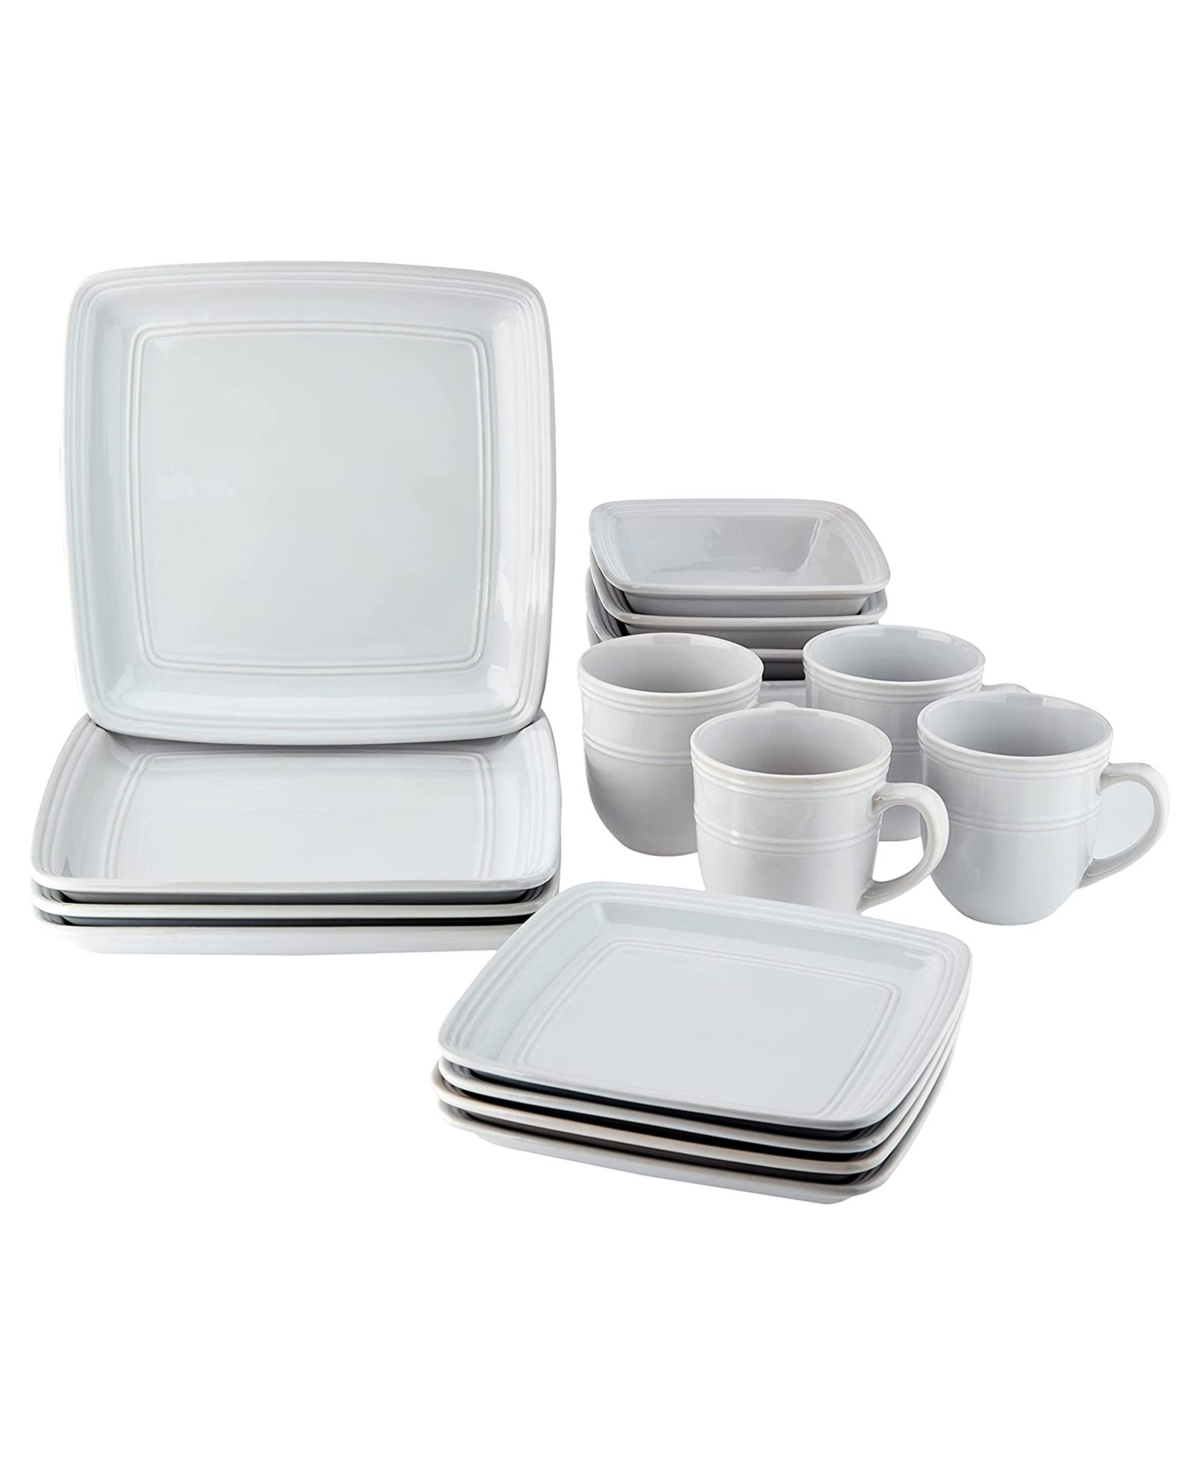 American Atelier Madelyn Square Set, 16 Piece In White